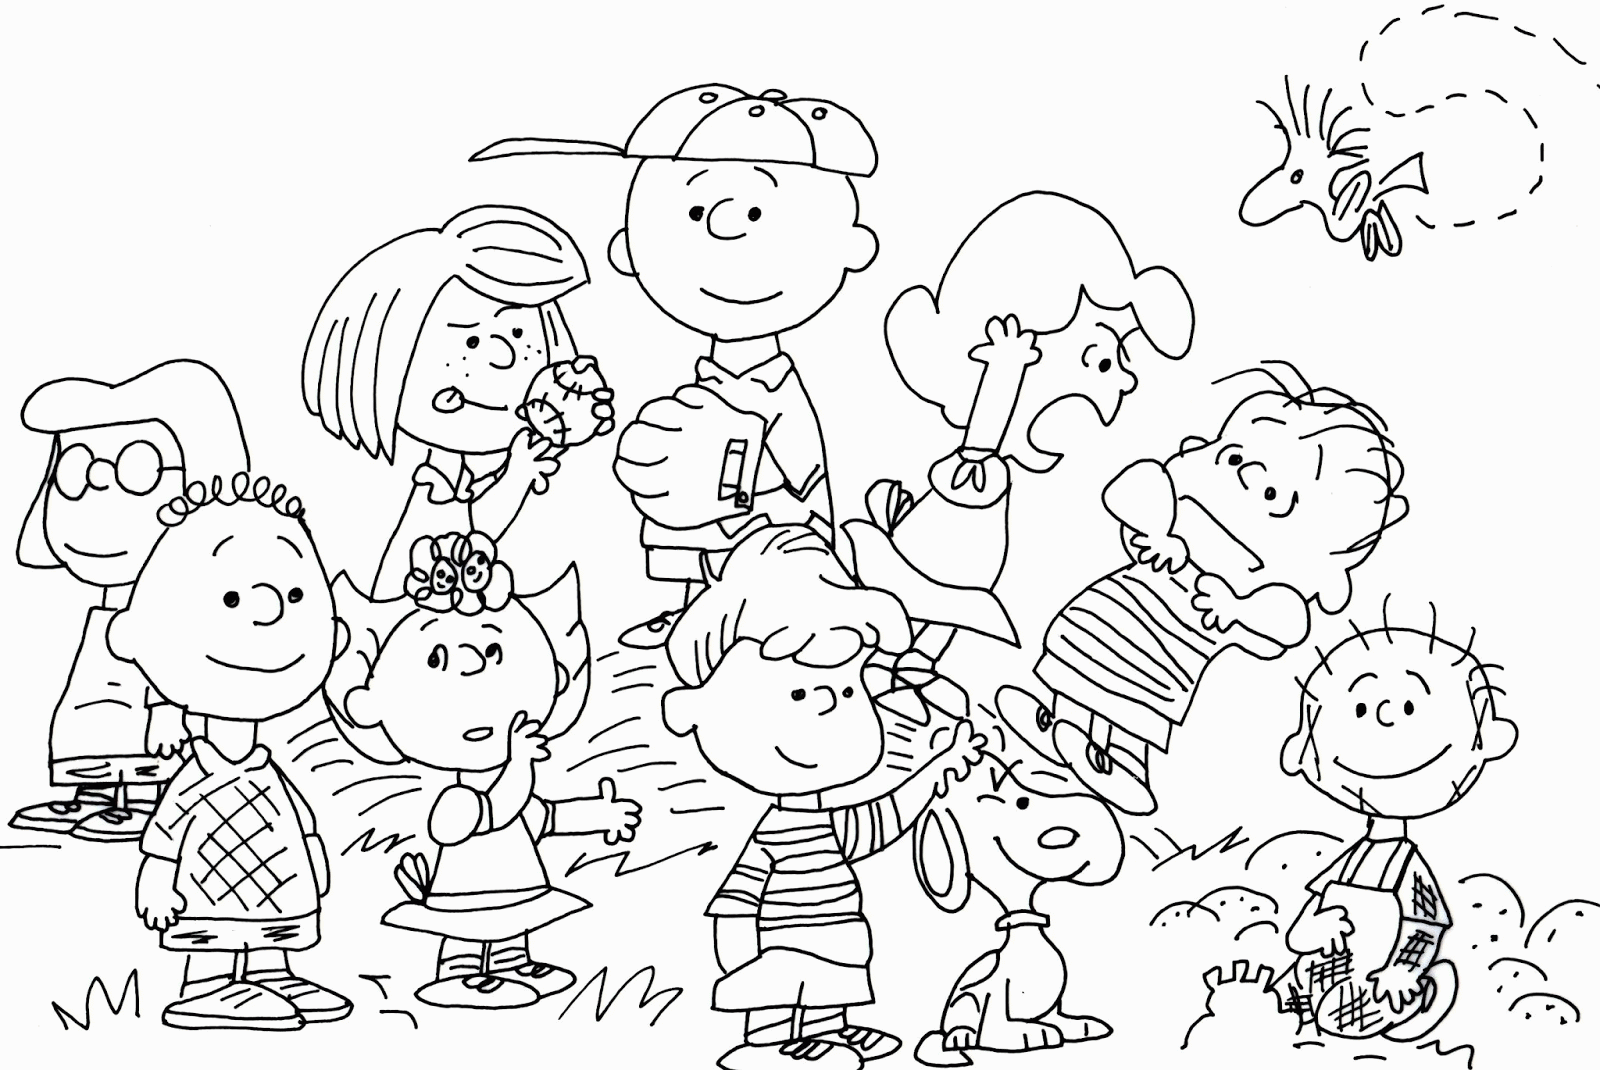 Peanuts Characters Thanksgiving Coloring Pages - Coloring Home1600 x 1070